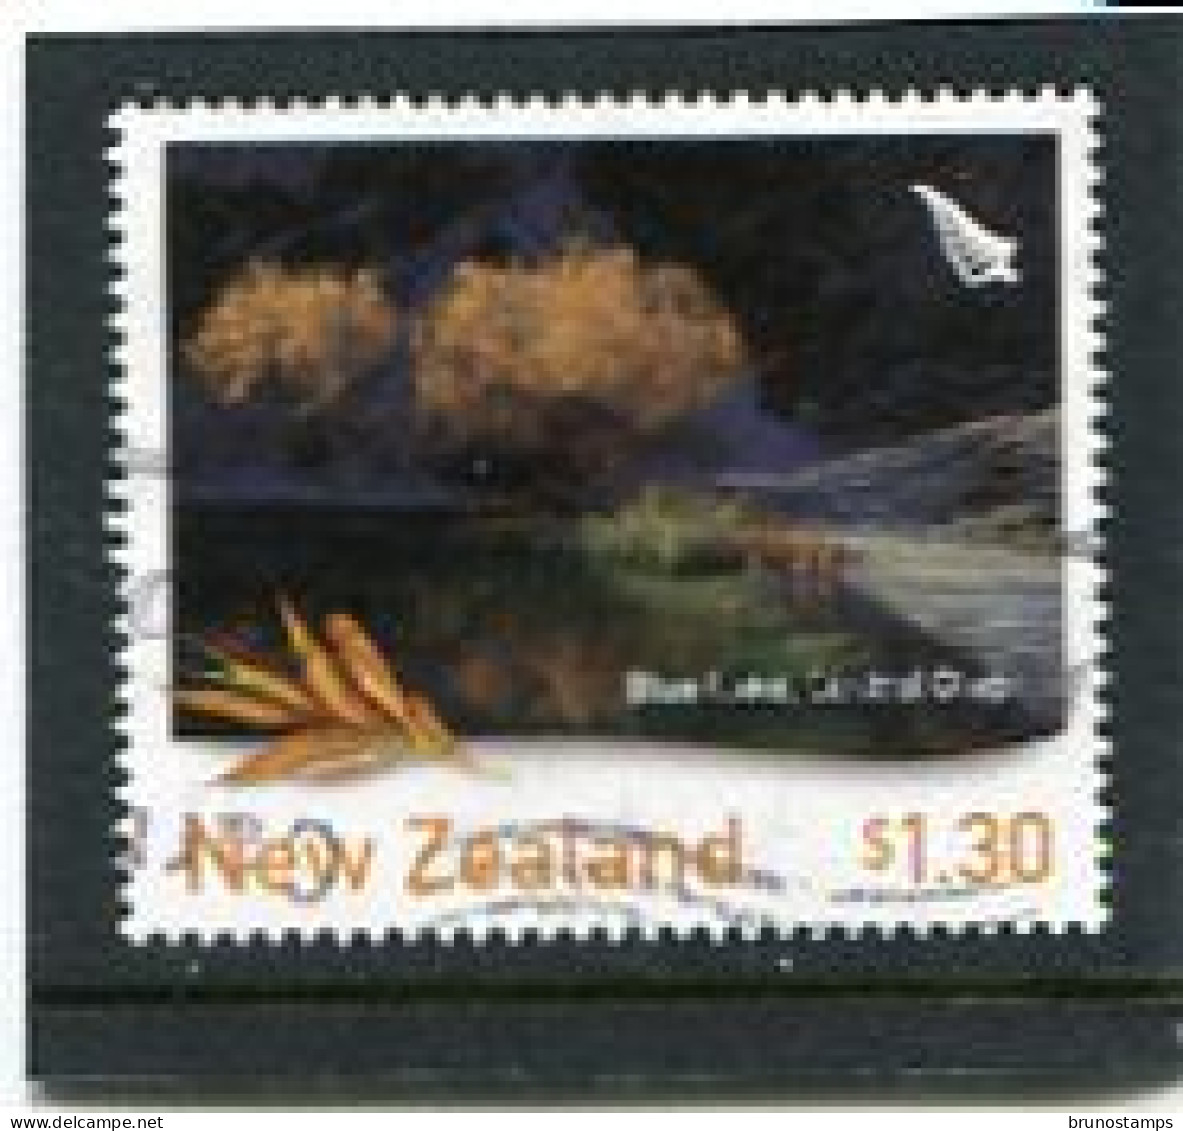 NEW ZEALAND - 2003  1.30$  BLUE LAKE  FINE  USED - Used Stamps